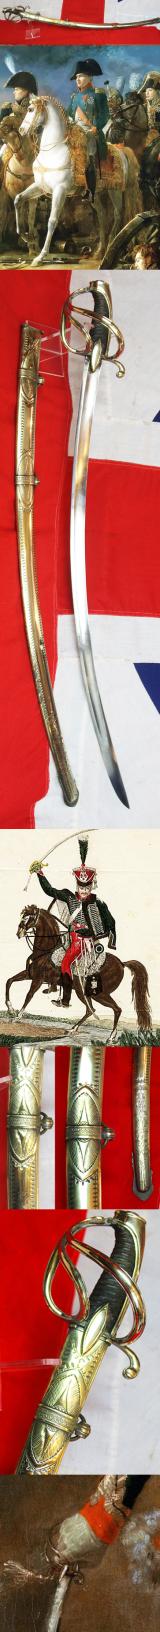 A Very Fine Napoleonic, Ist Empire, General Staff Officer's Sabre. Three Bar Hilt with Deluxe Imperial General Staff Officer's Scabbard